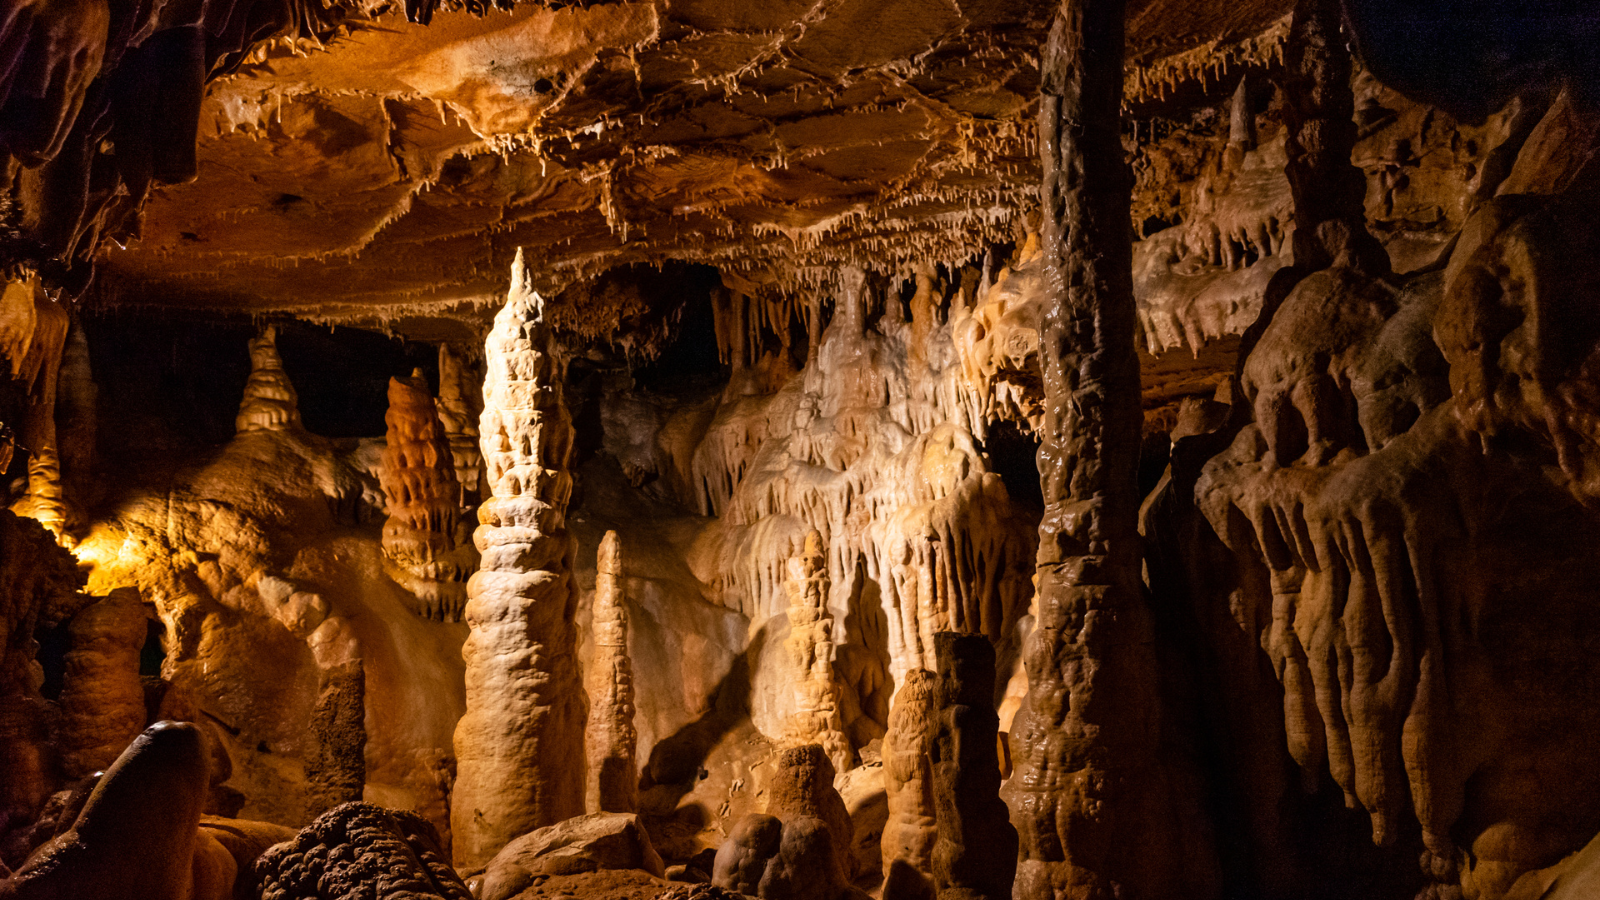 Explore caves in Moravian Karst - eighth thing in the list of 10 best things to do in Czech Republic